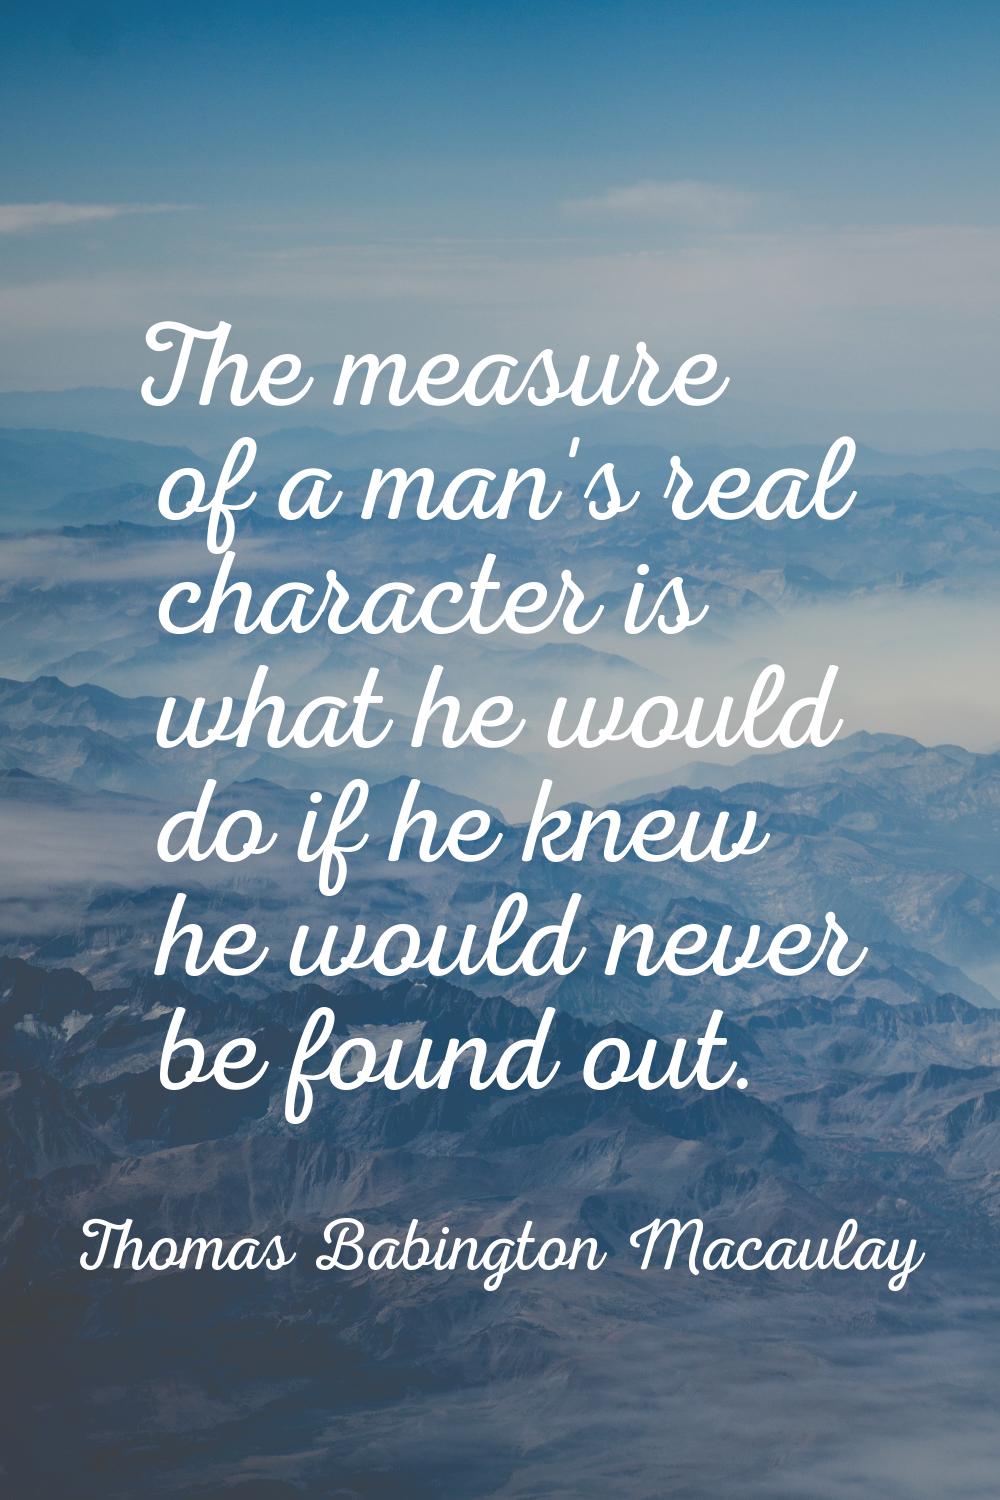 The measure of a man's real character is what he would do if he knew he would never be found out.